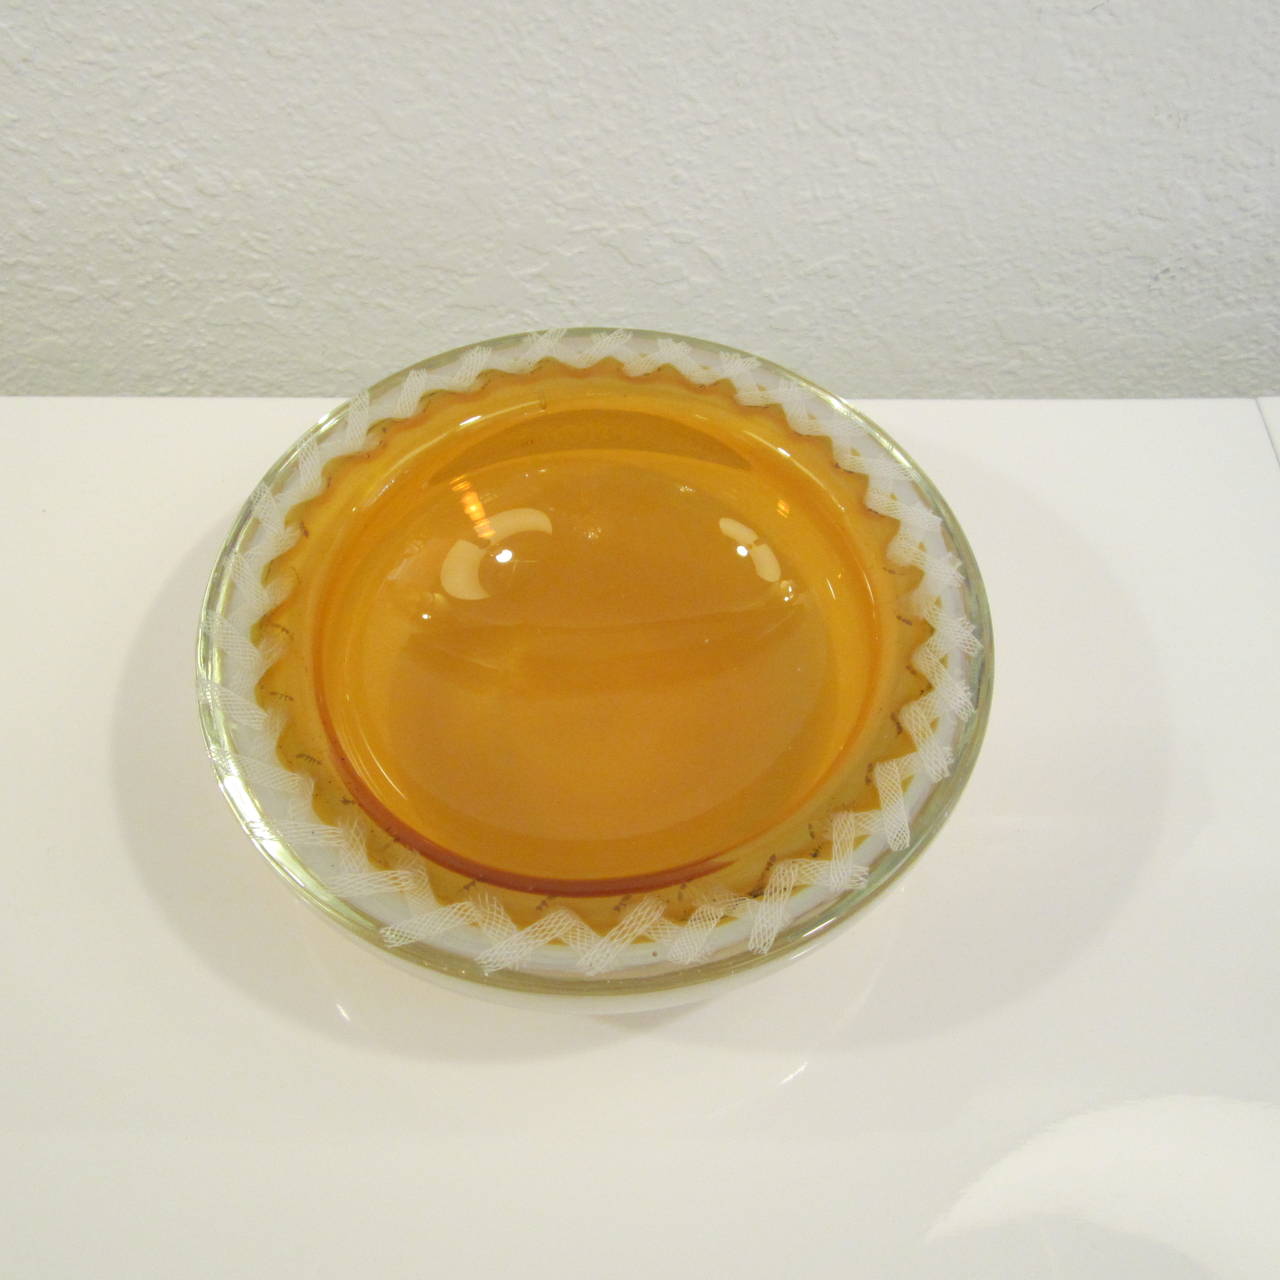 Handblown Murano glass console bowl with golden center and a white latticino boarder. The outer glass is opalescent with an almost pinkish hue.
Very attractive.